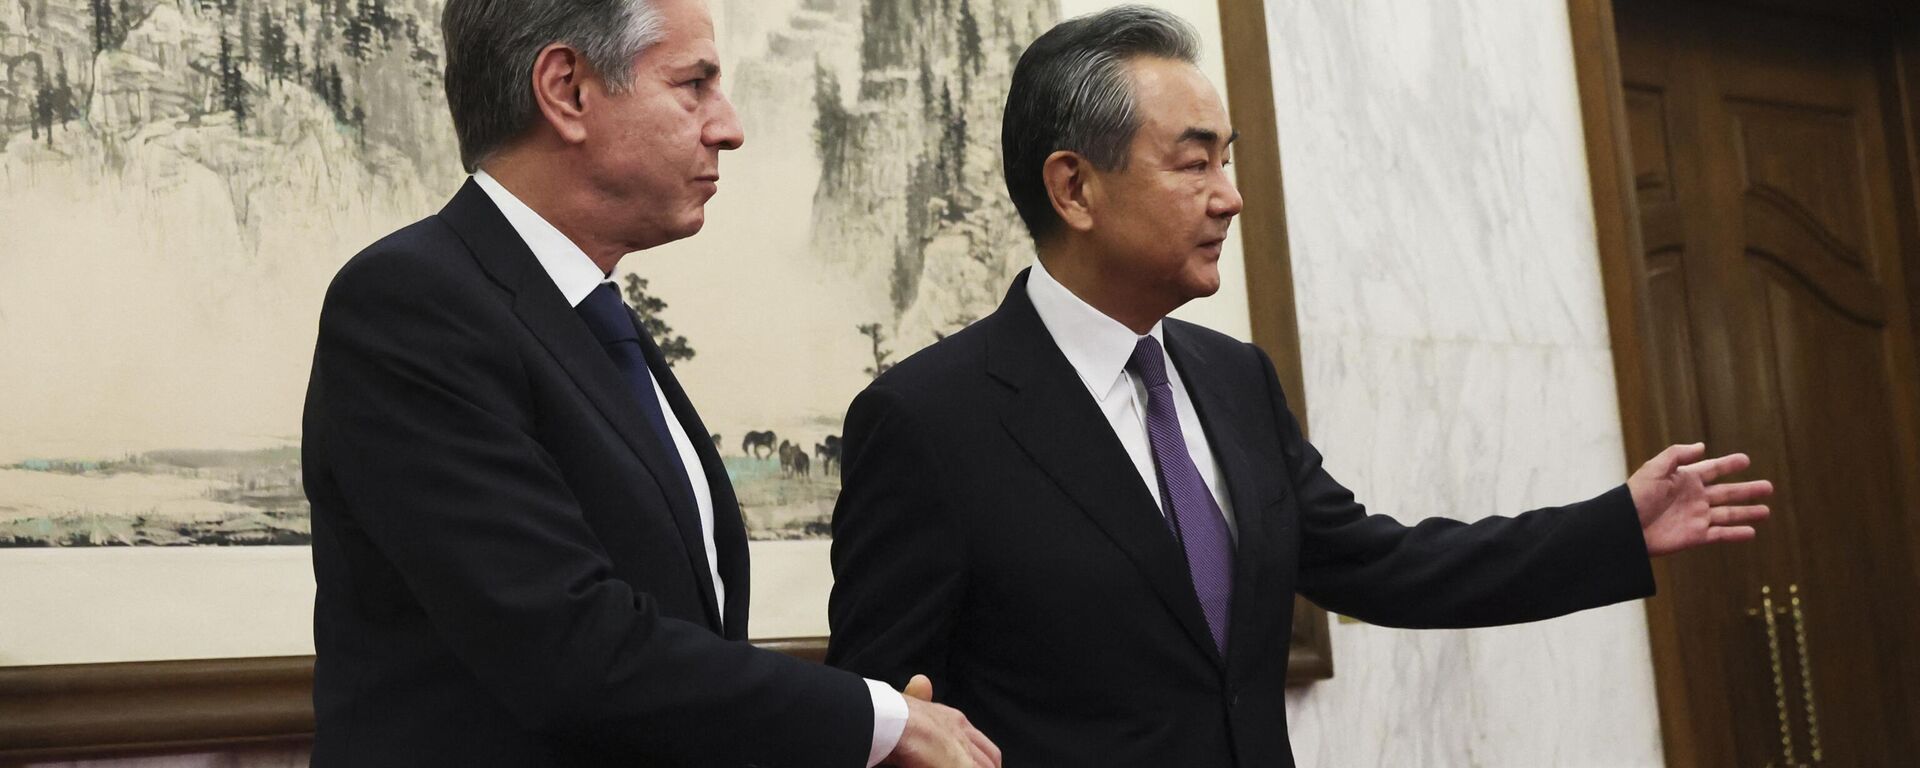 US Secretary of State Antony Blinken (L) shakes hands with China's Director of the Office of the Central Foreign Affairs Commission Wang Yi at the Diaoyutai State Guesthouse in Beijing on June 19, 2023 - Sputnik International, 1920, 19.06.2023